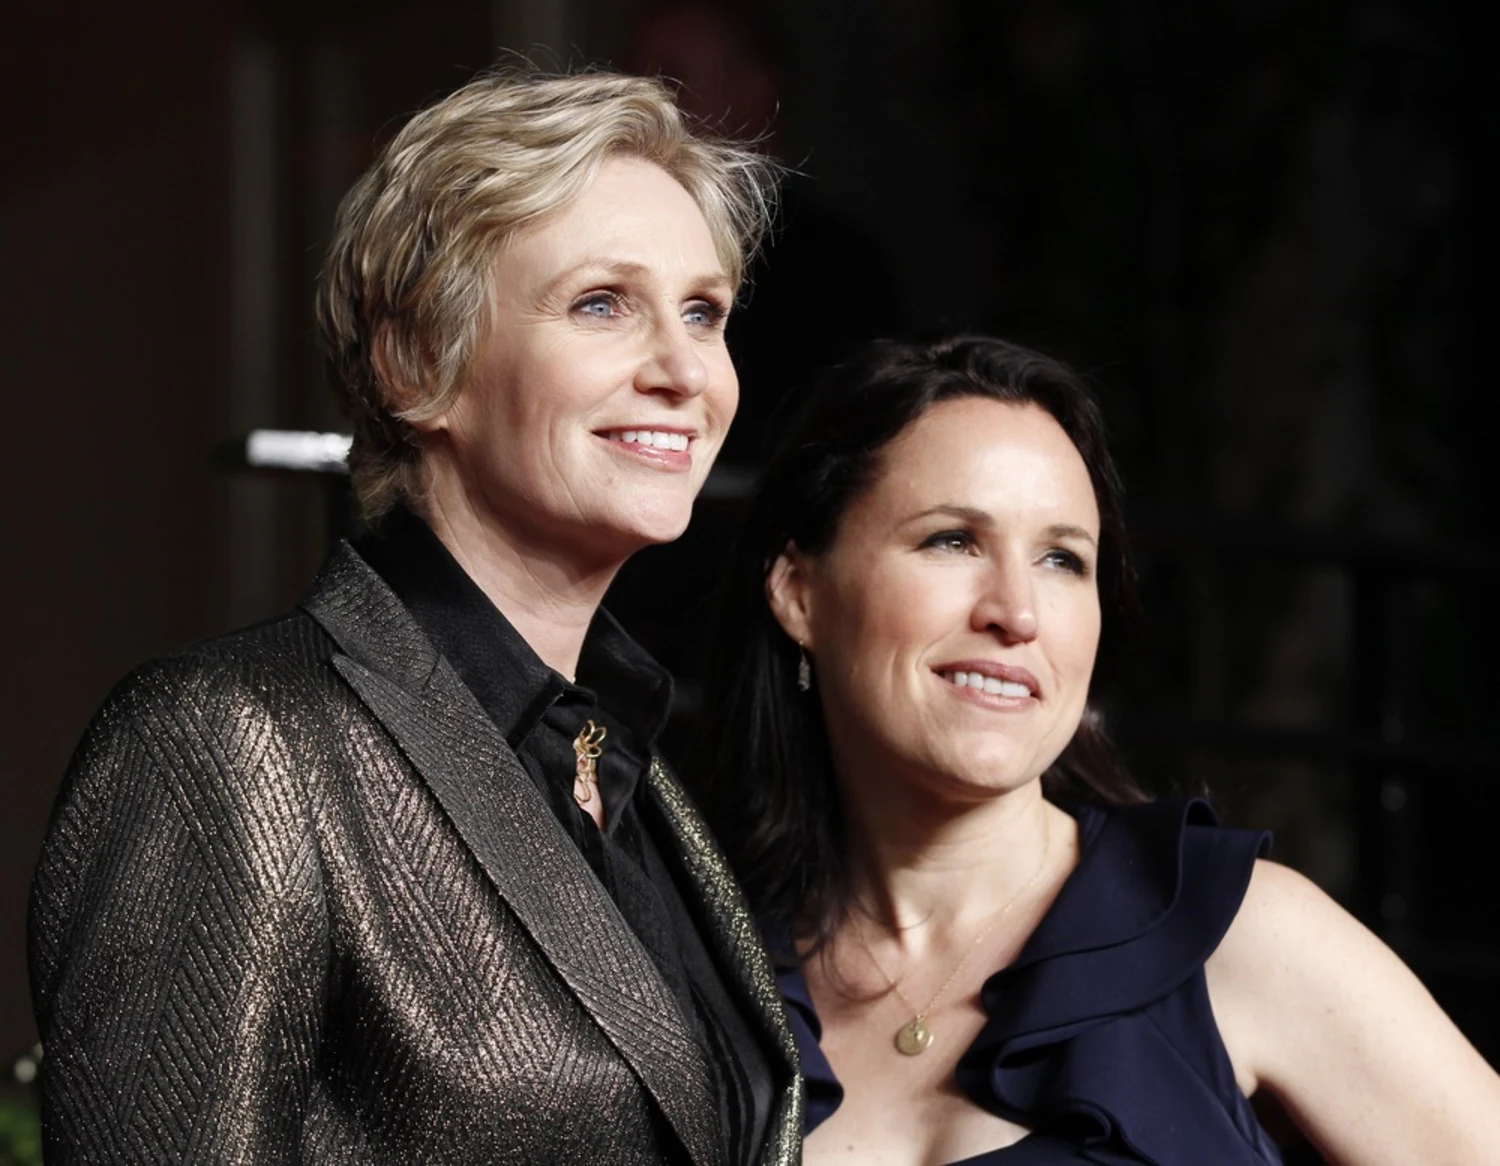 Lara Embry - Clinical Psychologist And Hollywood Director Married Writer Jane Lynch